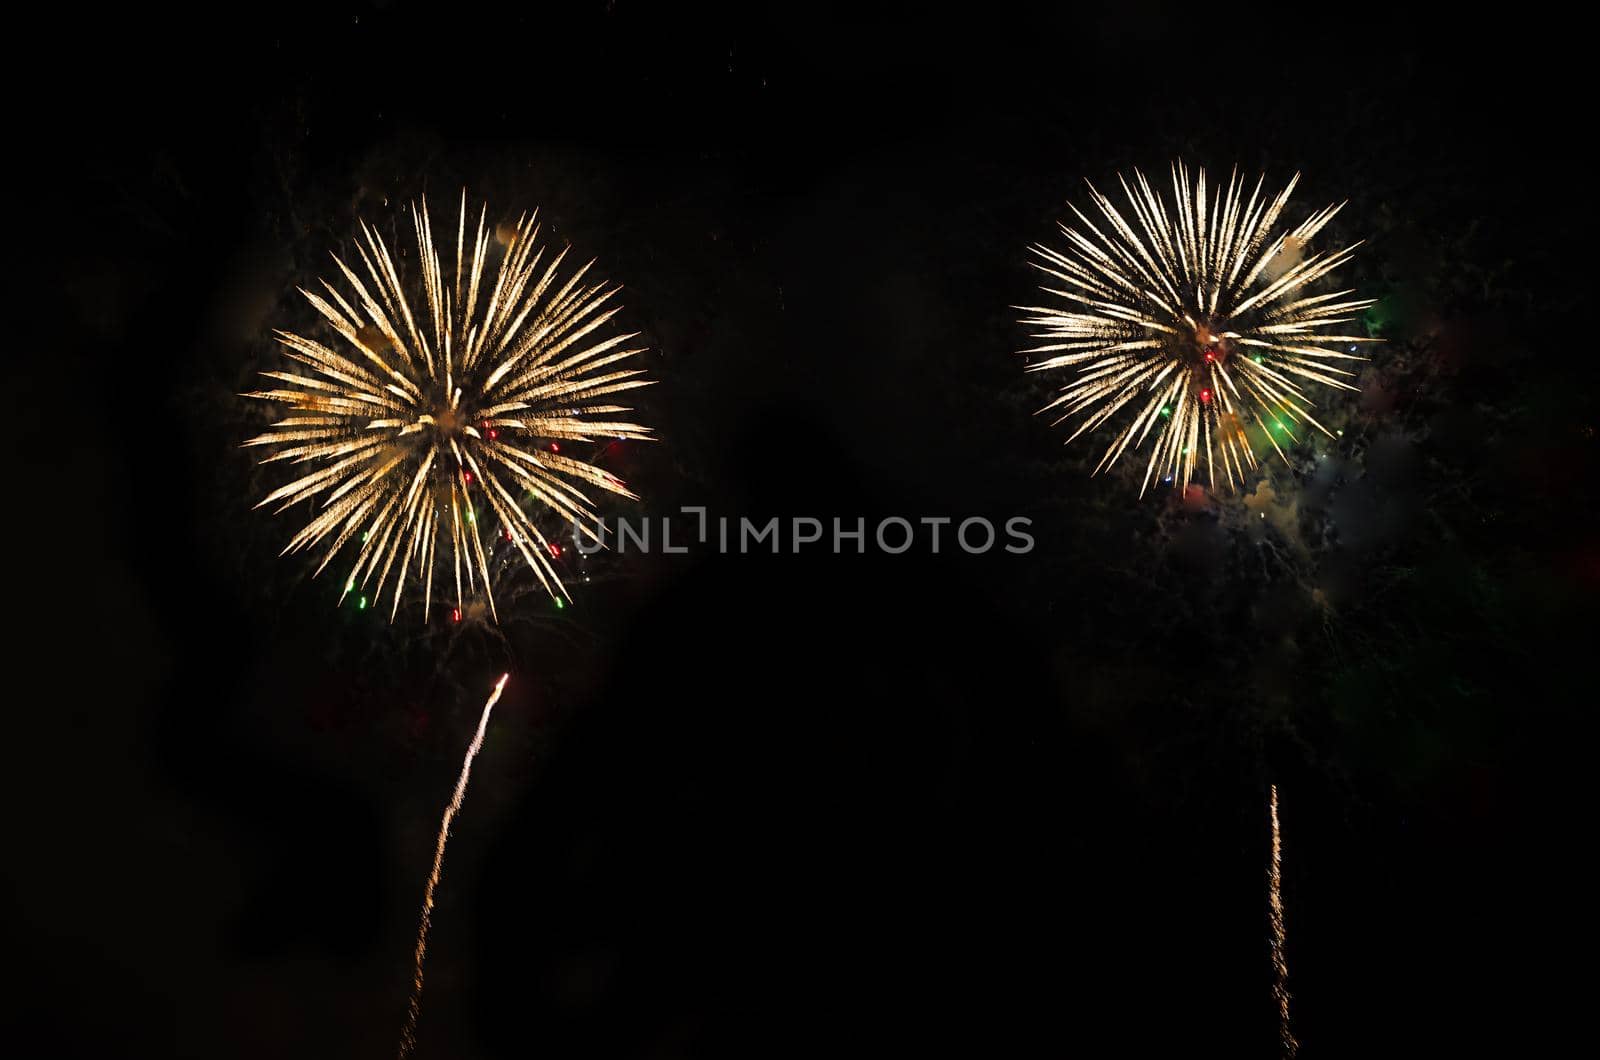 Two fireworks on night sky.